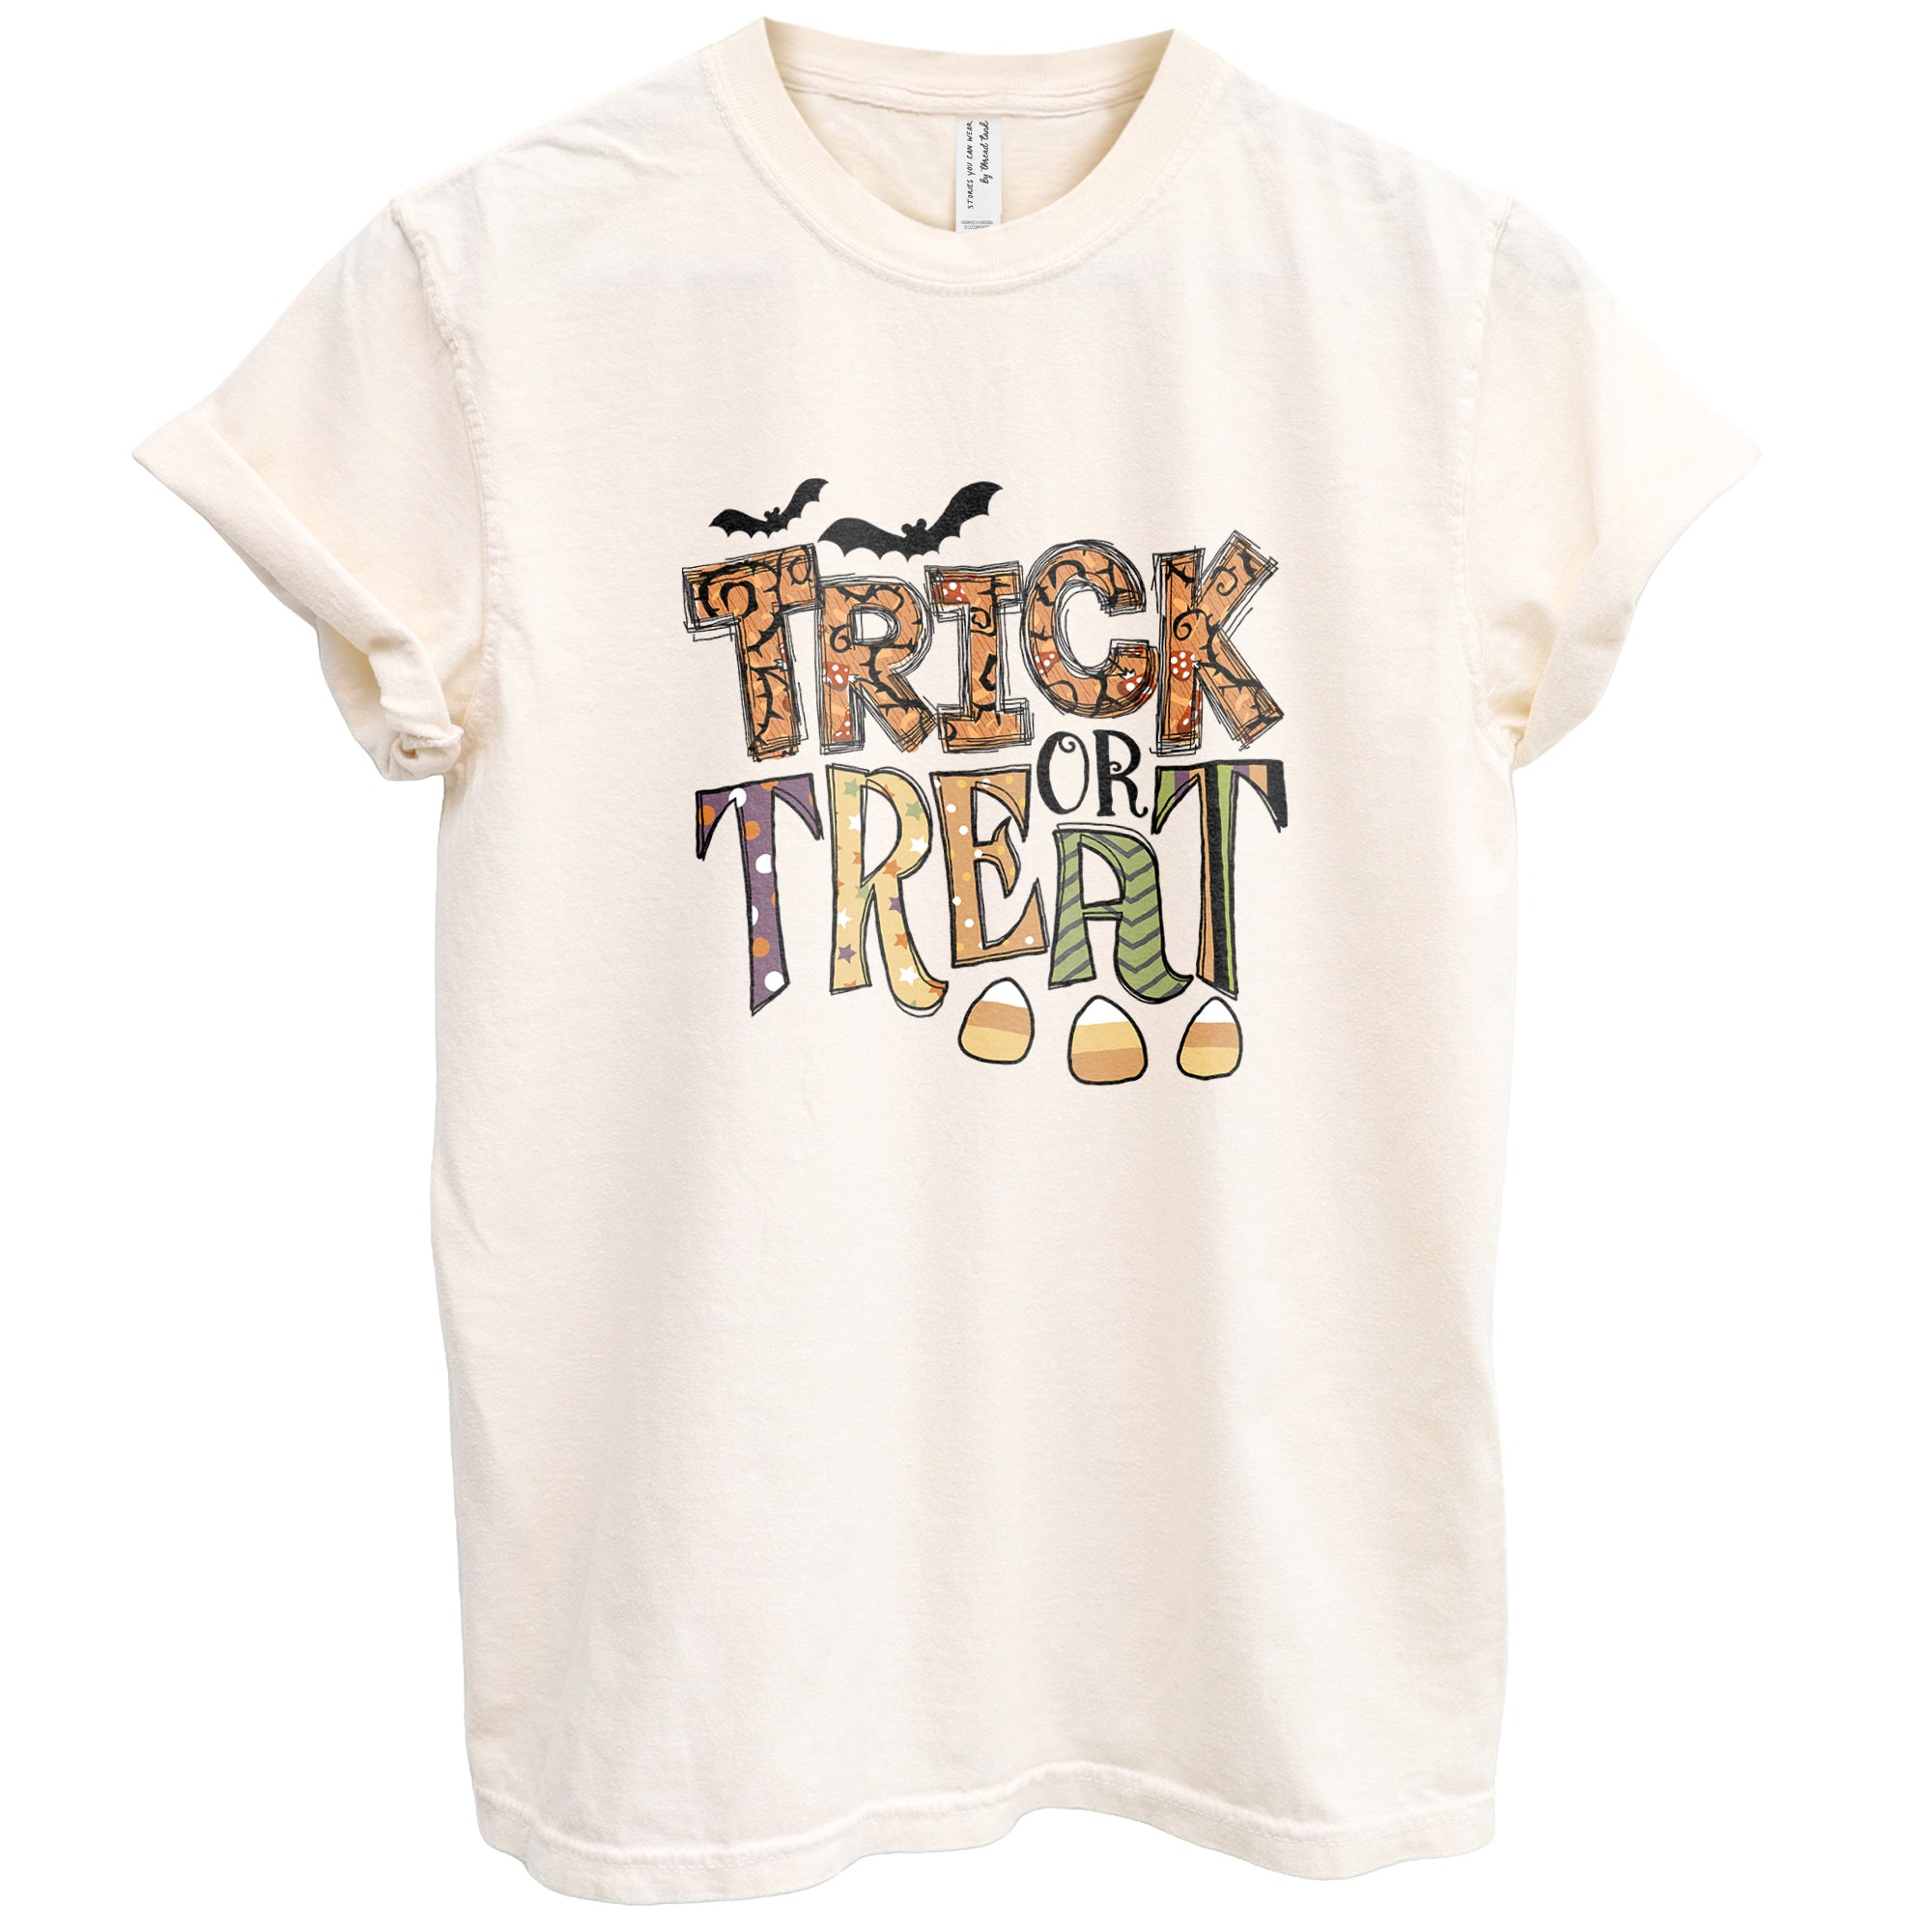 Trick or Treat Halloween Oversized Shirt Garment-Dyed Graphic Tee